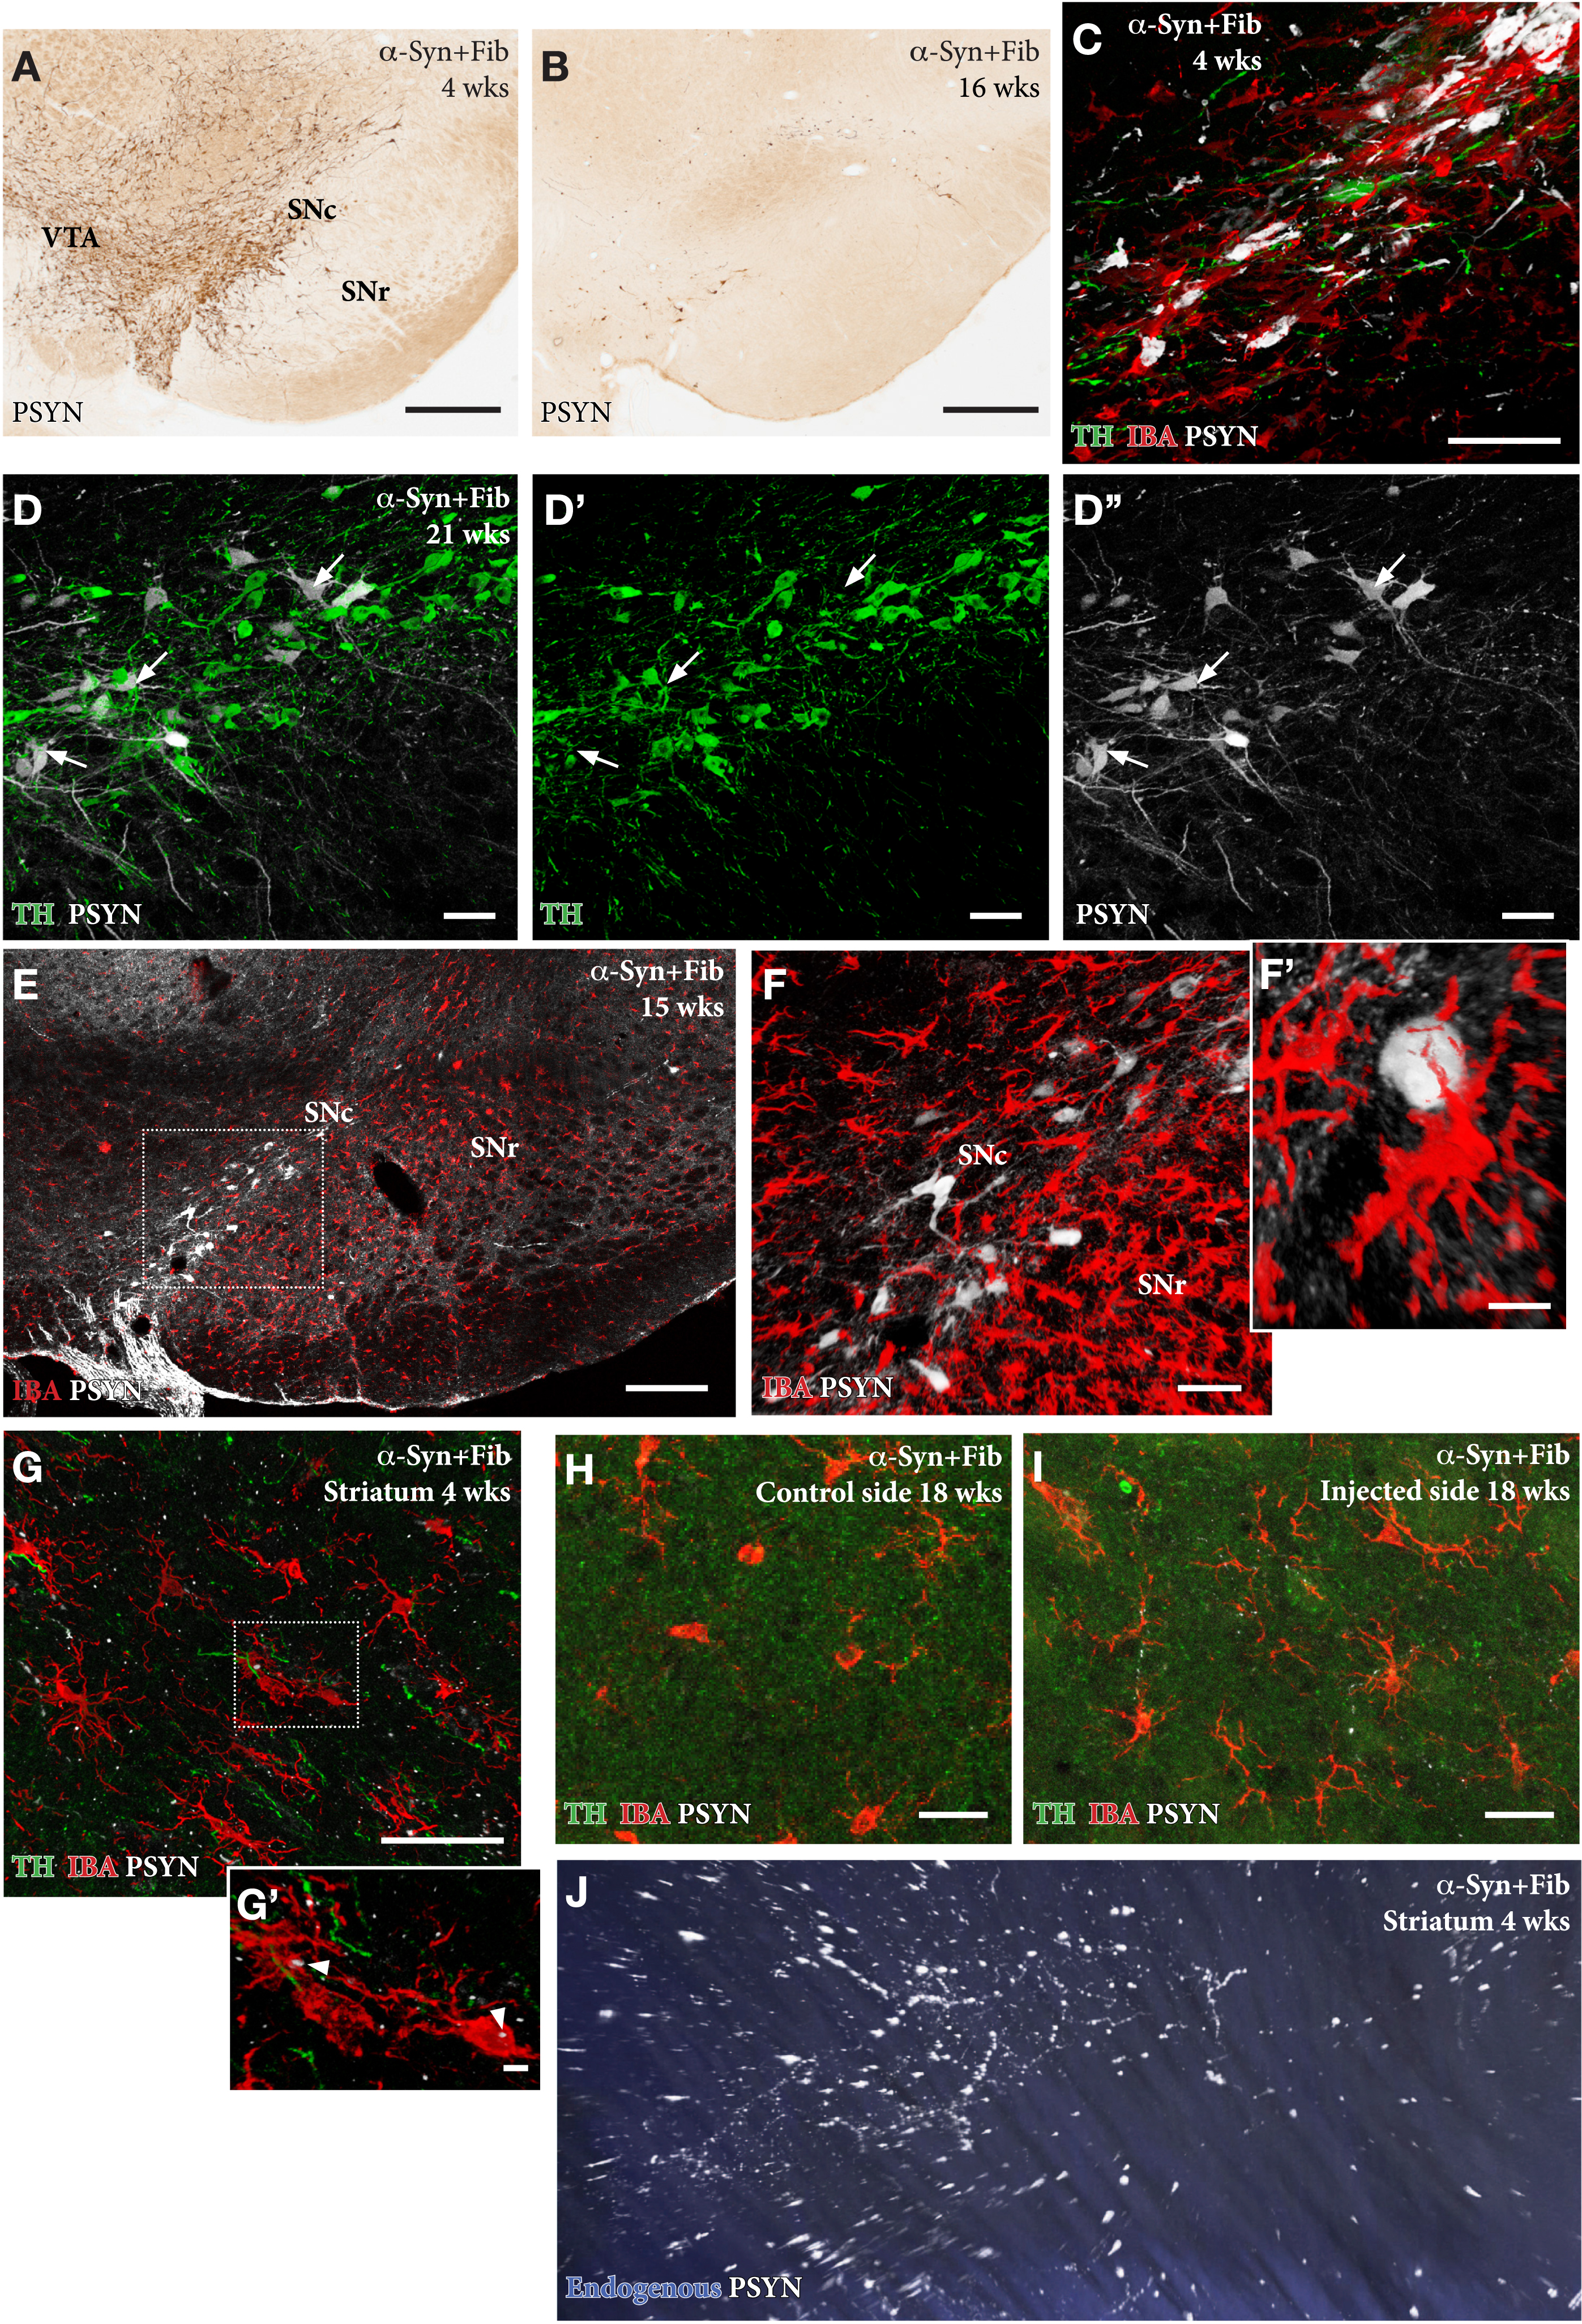 In the AAV/PFF treated rats prominent p-syn+pathology develops early, already at 4 weeks, in the DA neurons (A, C), as well as in their axons and terminals in the striatum, as illustrated in the Supplementary 3D movie captured by light-sheet microscopy (Supplementary Movie S1; still image in J). This is accompanied by an Iba1 + microglial response (F, G, H) and downregulation of TH (arrows in D-D''), that is maintained also at longer time-points. The p-syn pathology declines over time (B, E, F) which is in line with the progressive loss of the affected DA neurons. A notable feature of the microglial response is the appearance of p-syn+inclusions inside the Iba1 + microglia (arrow heads in G'). Scale bars: 500μm (A,B), 50μm (C,D,F,G,H,I), 200μm (E), 10μm (F',G').